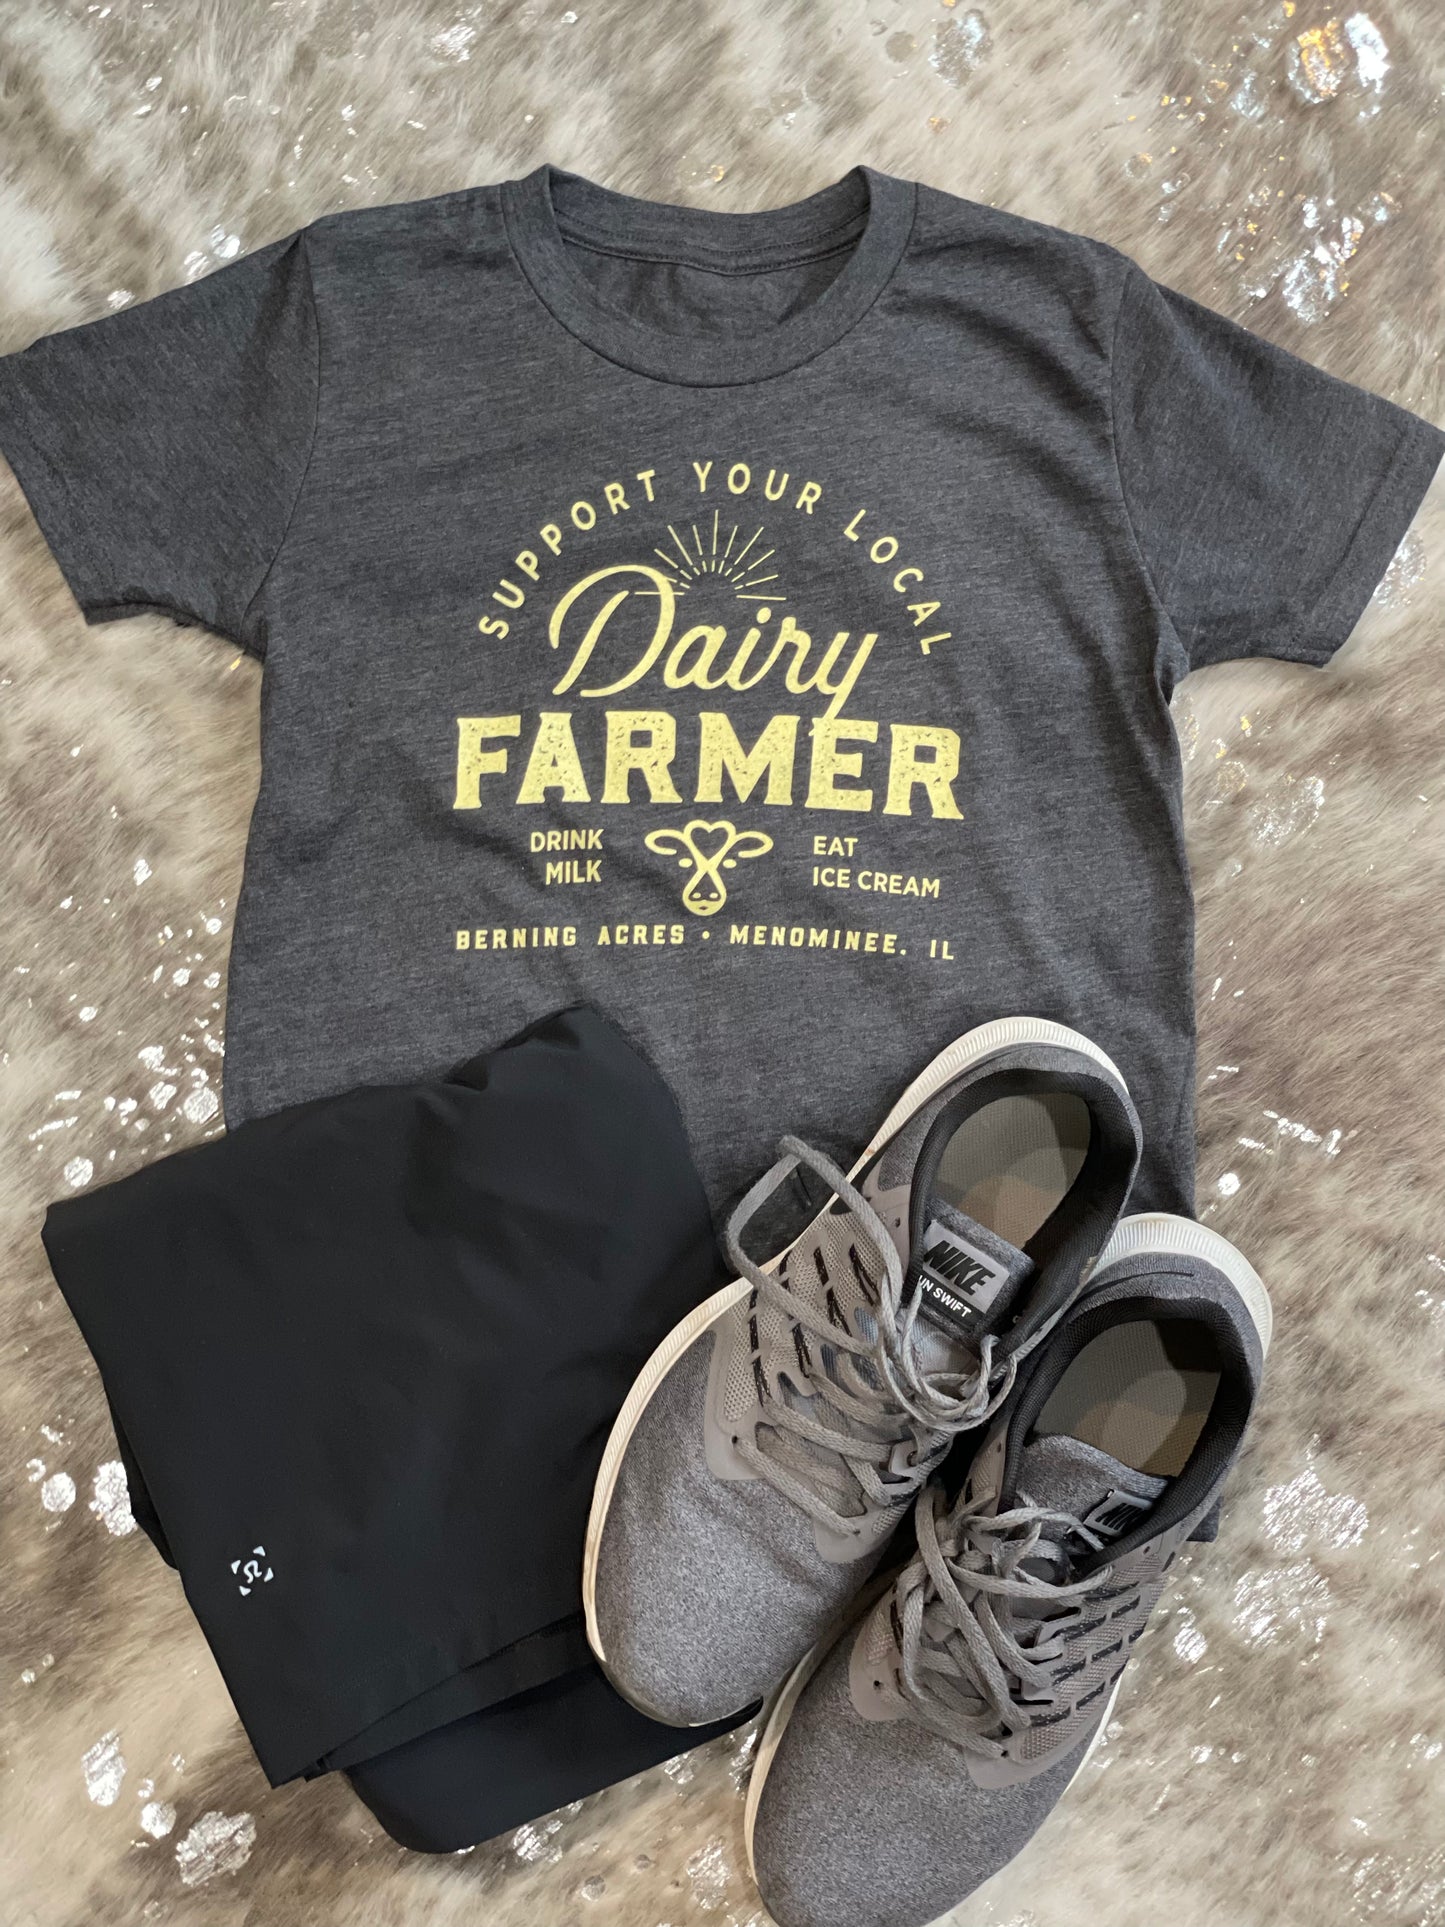 Support Your LOCAL Dairy Farmer tee